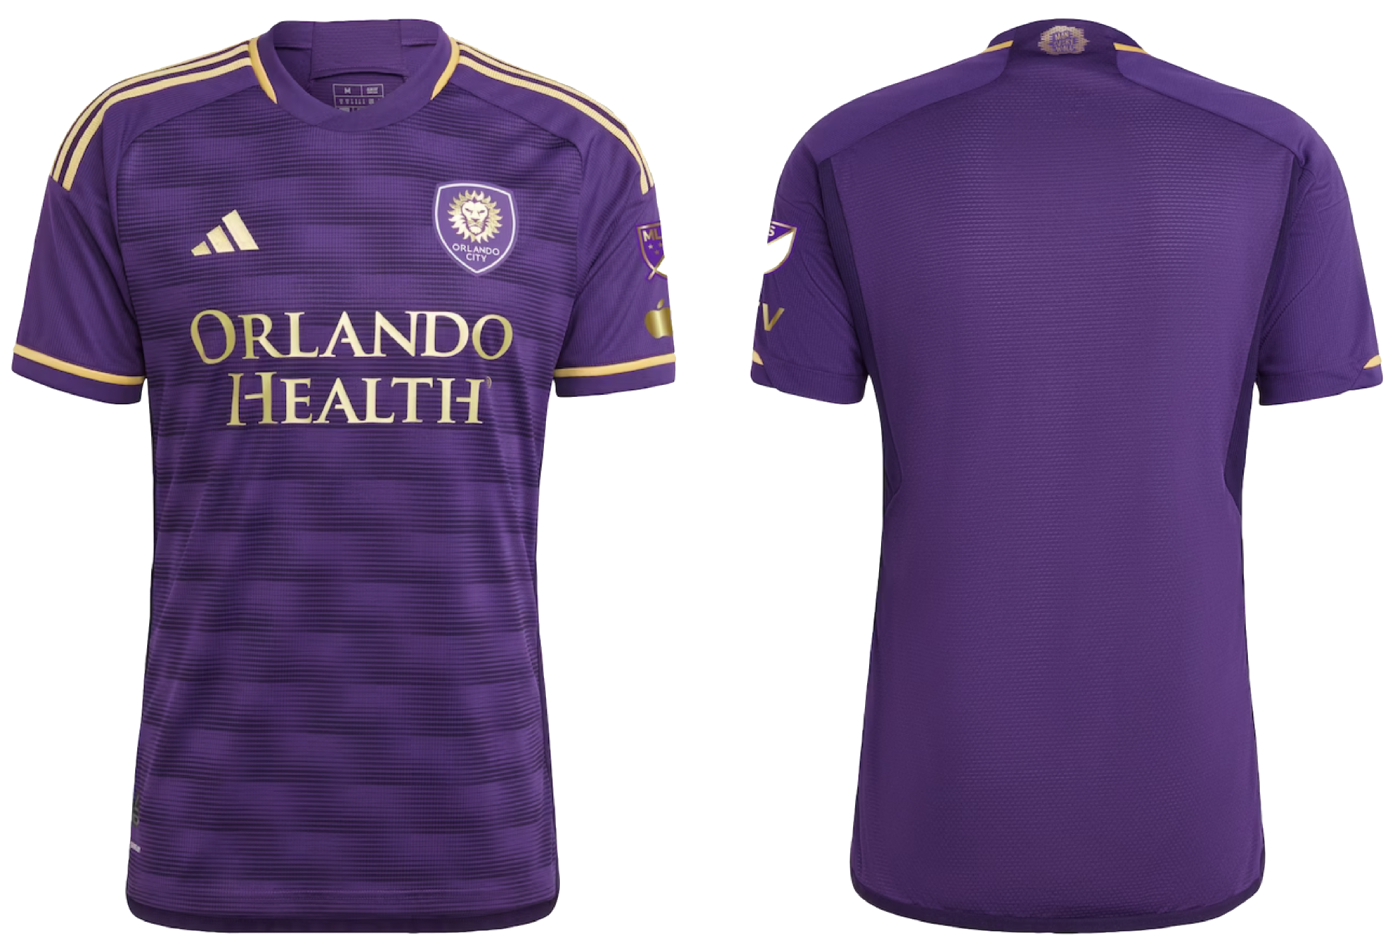 Twitter reacts to… the new 2023 Orlando City SC home jersey